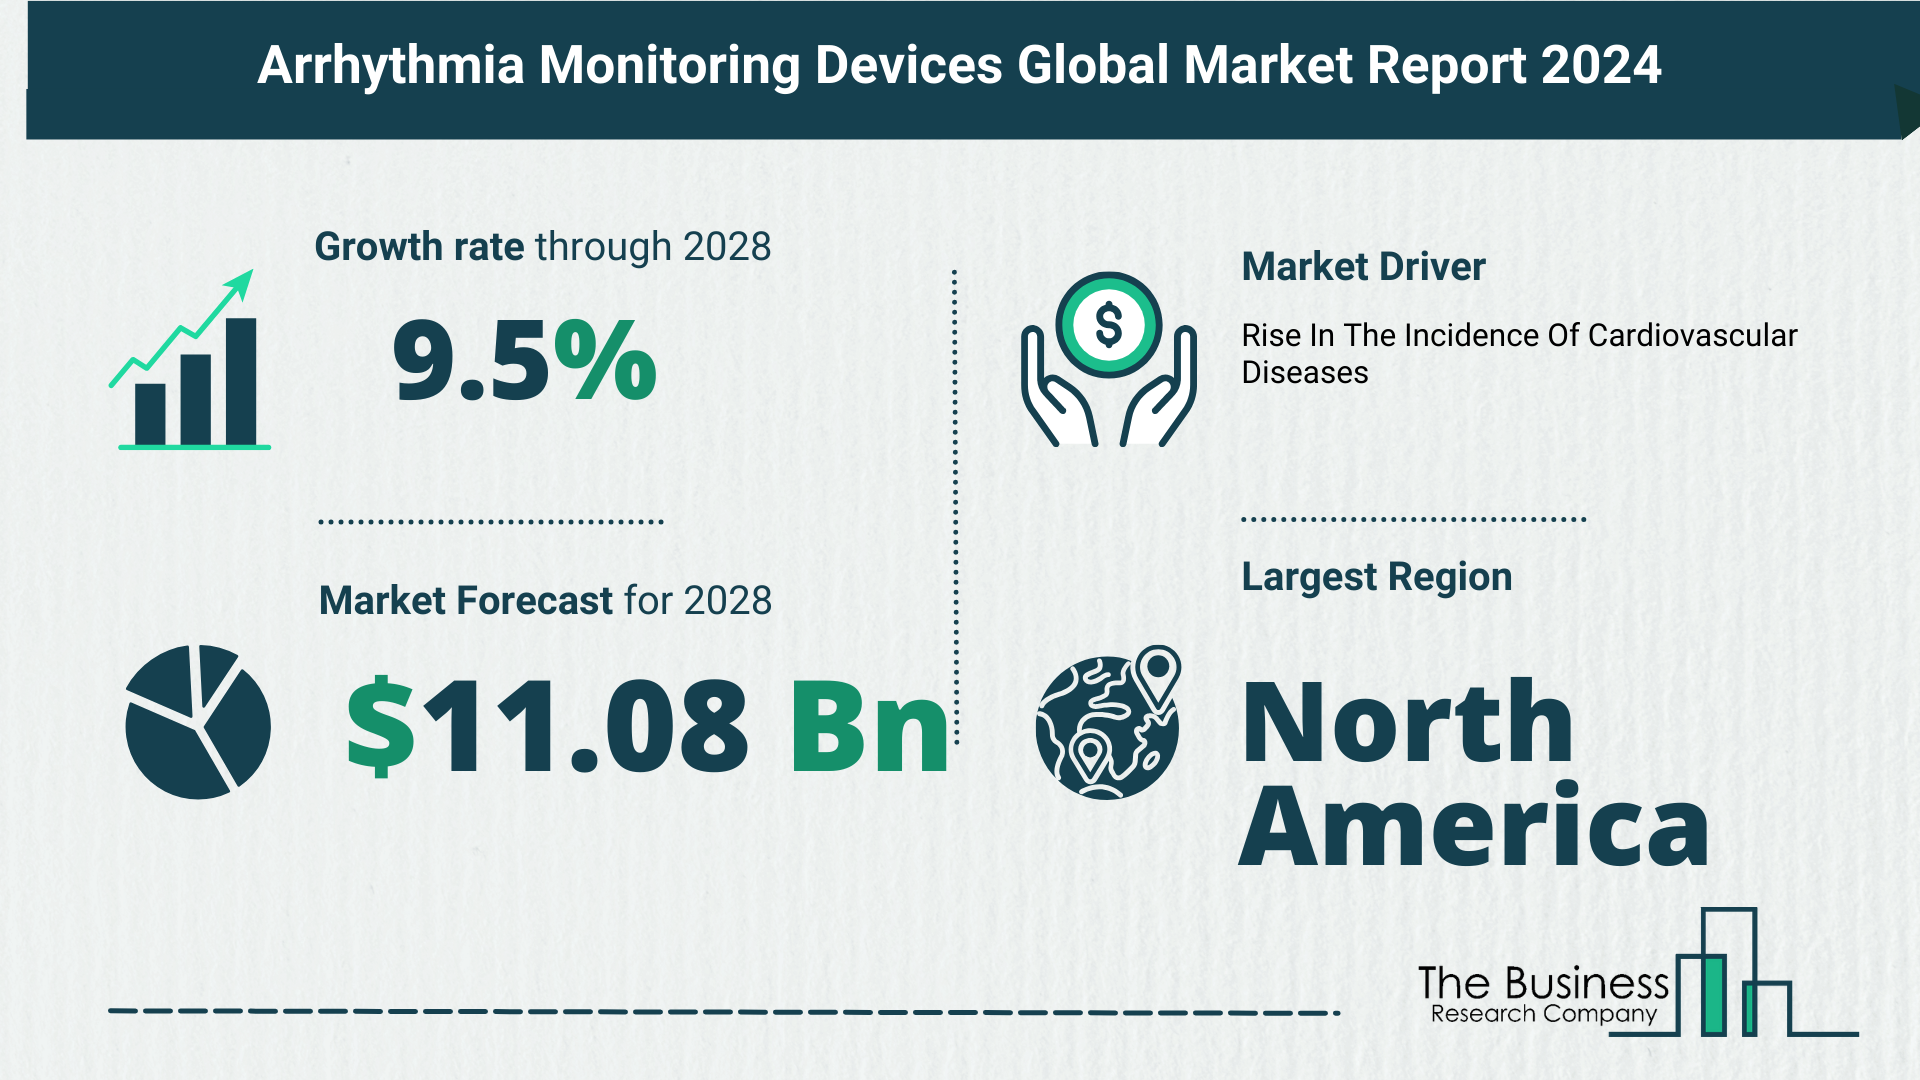 How Is The Arrhythmia Monitoring Devices Market Expected To Grow Through 2024-2033